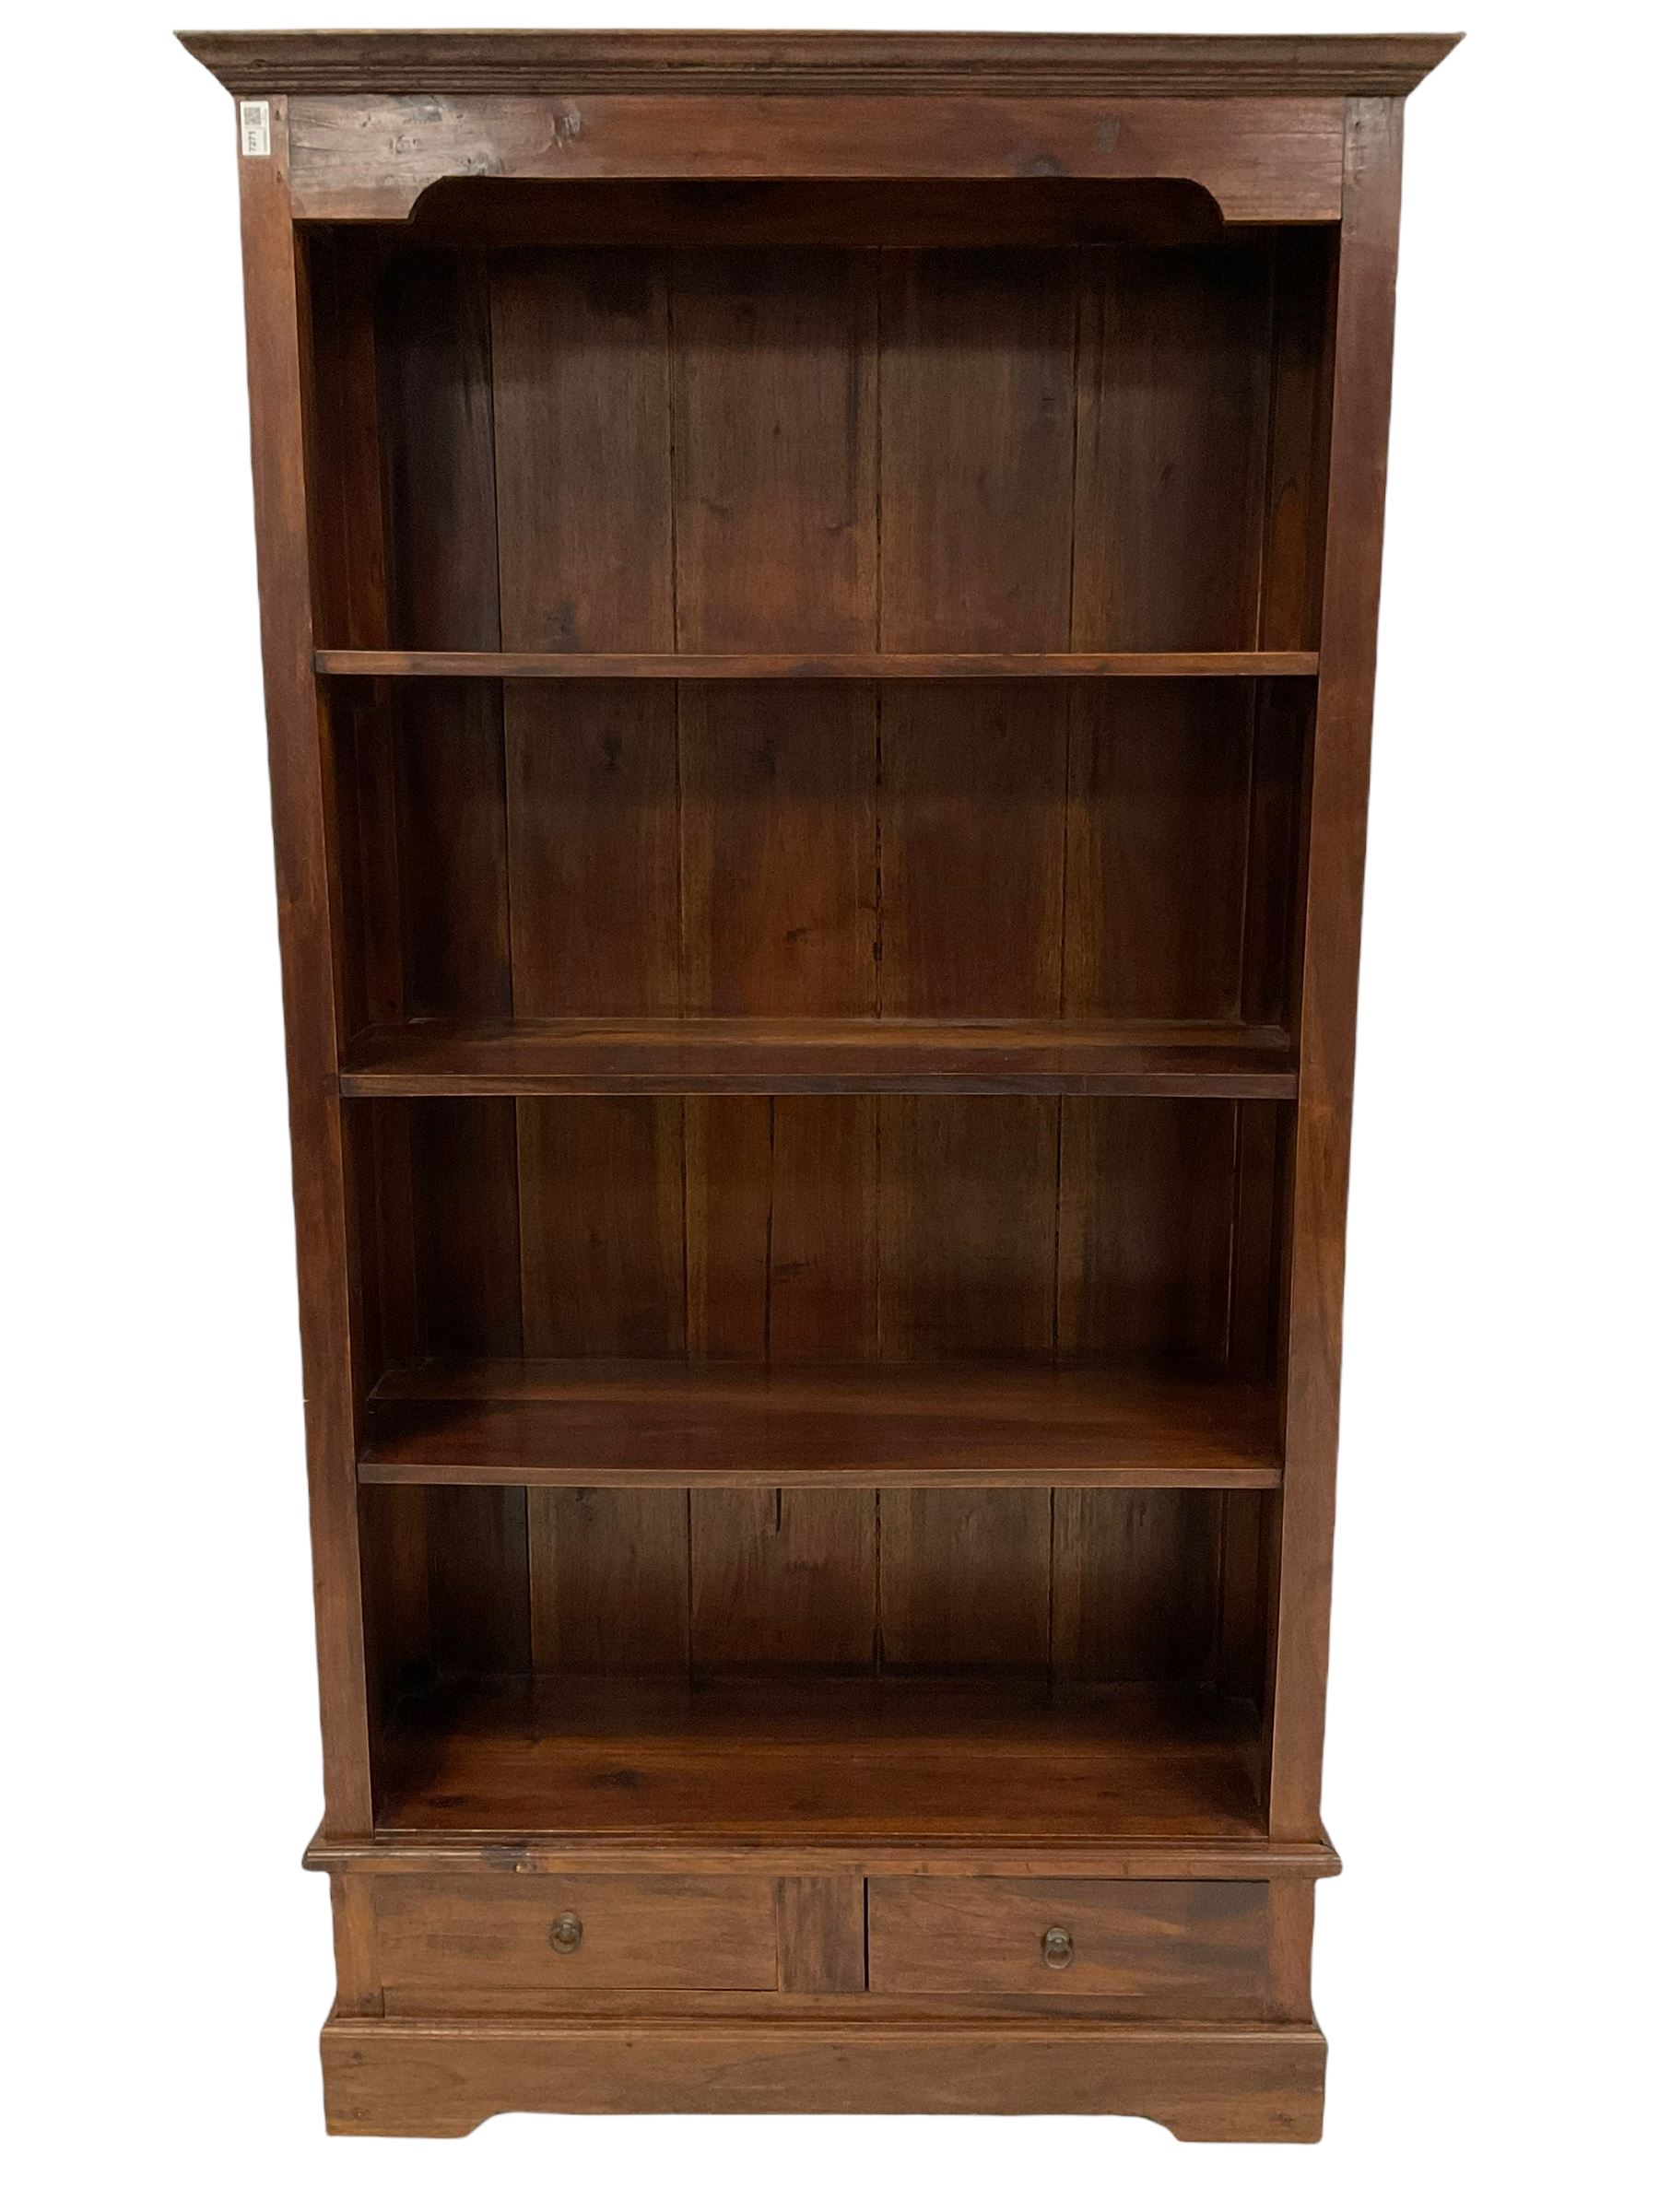 Tall stained hardwood bookcase